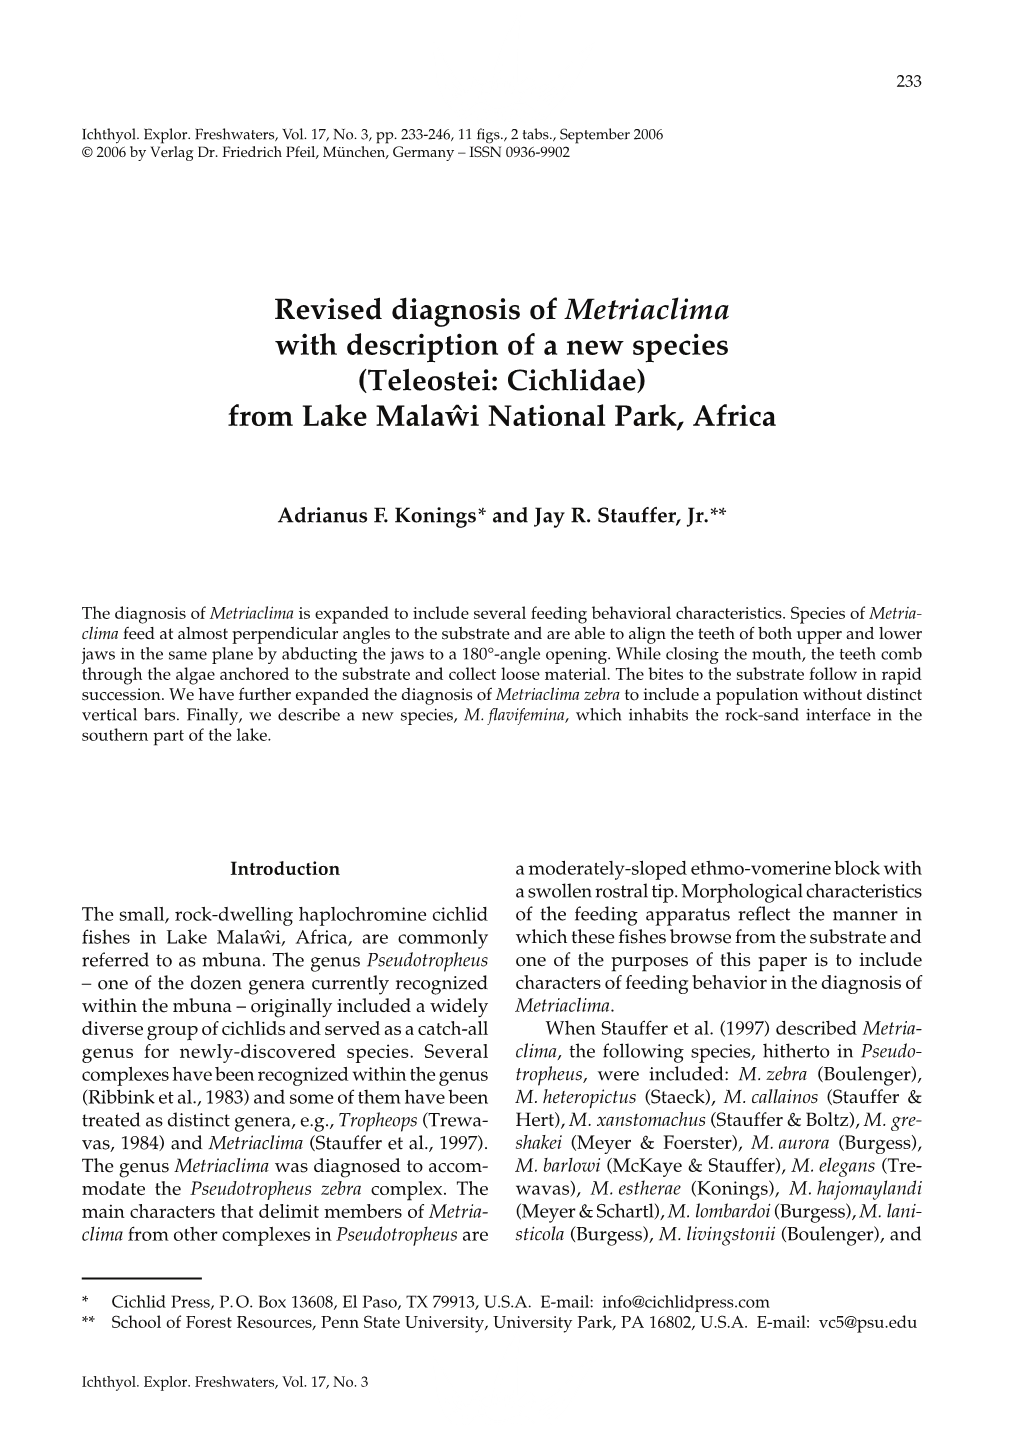 Revised Diagnosis of Metriaclima with Description of a New Species (Teleostei: Cichlidae) from Lake Malawi National Park, Africa